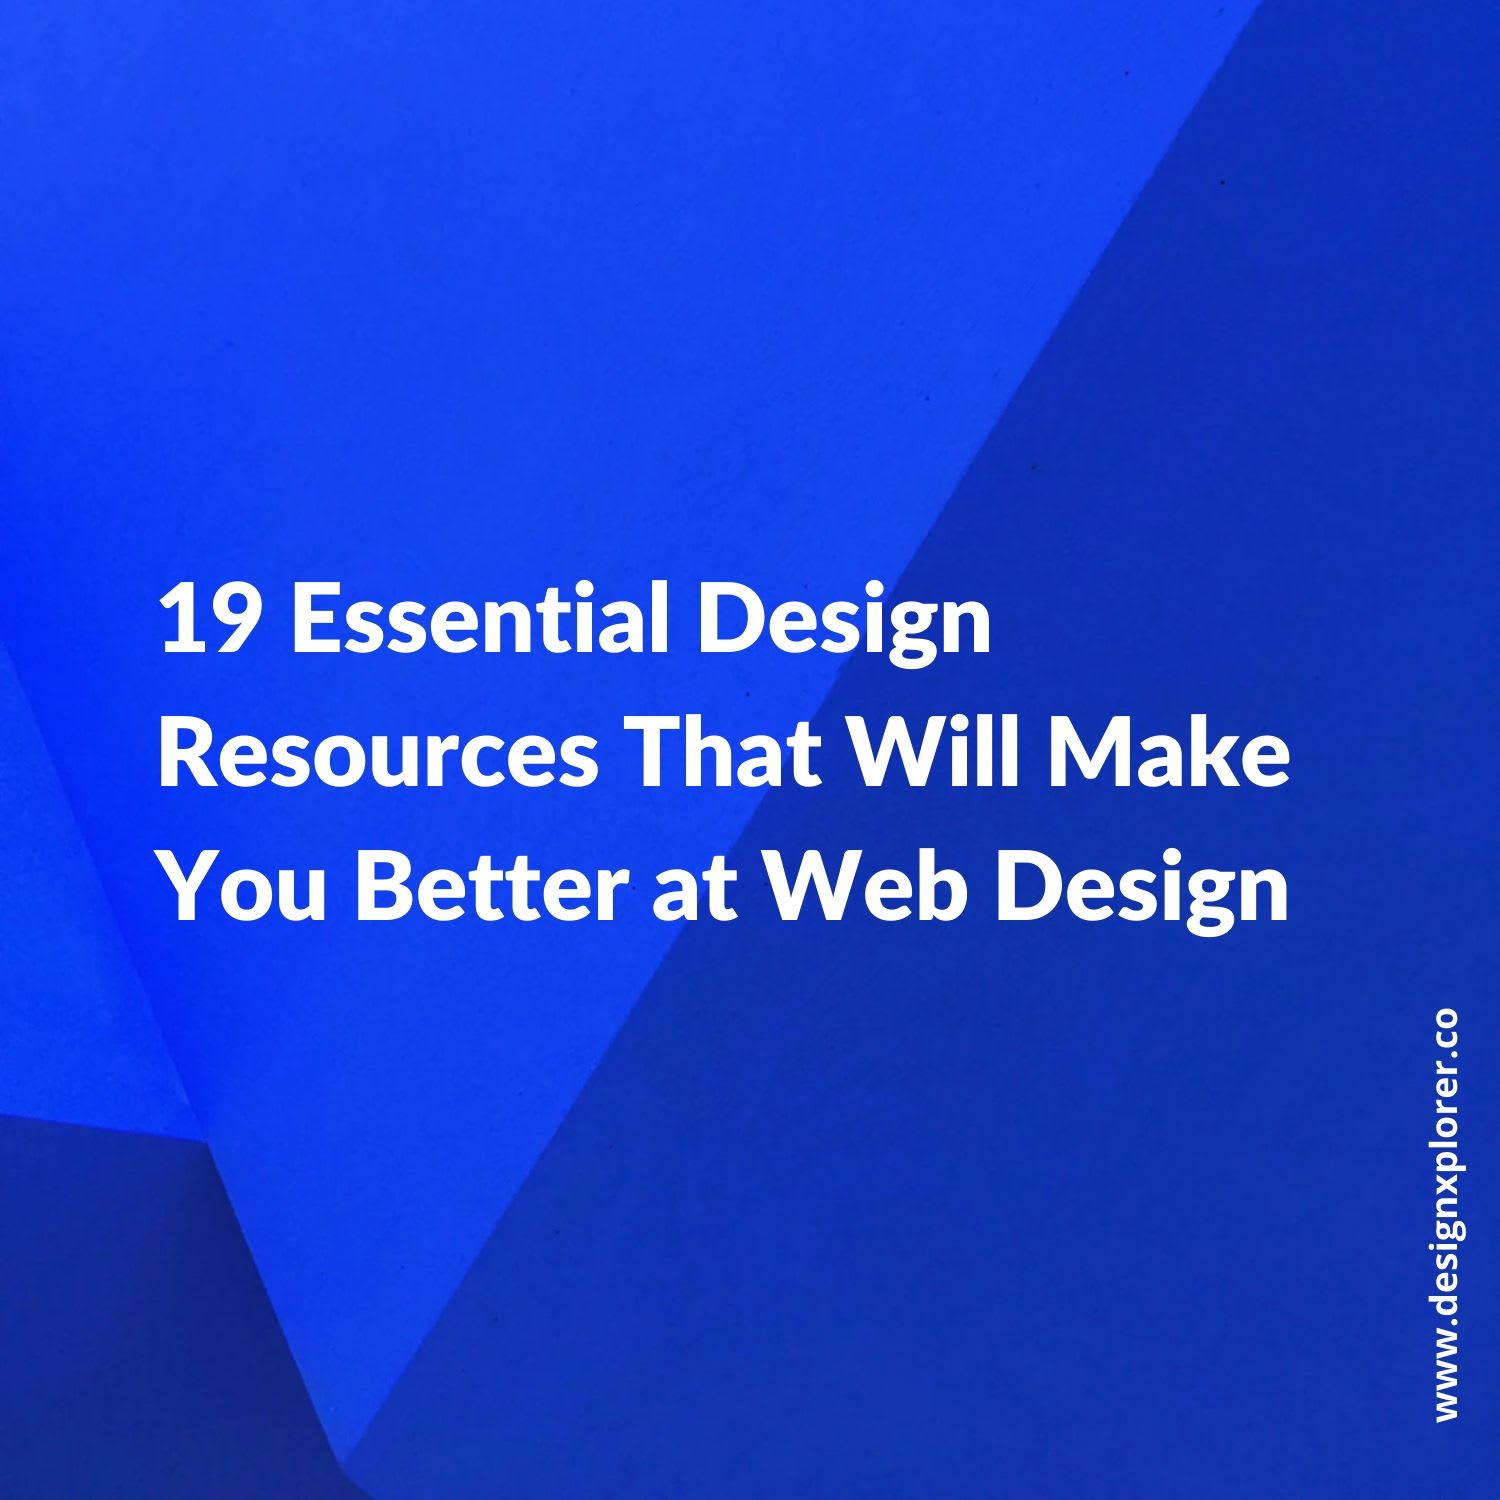 19 Essential Design Resources That Will Make You Better at Web Design